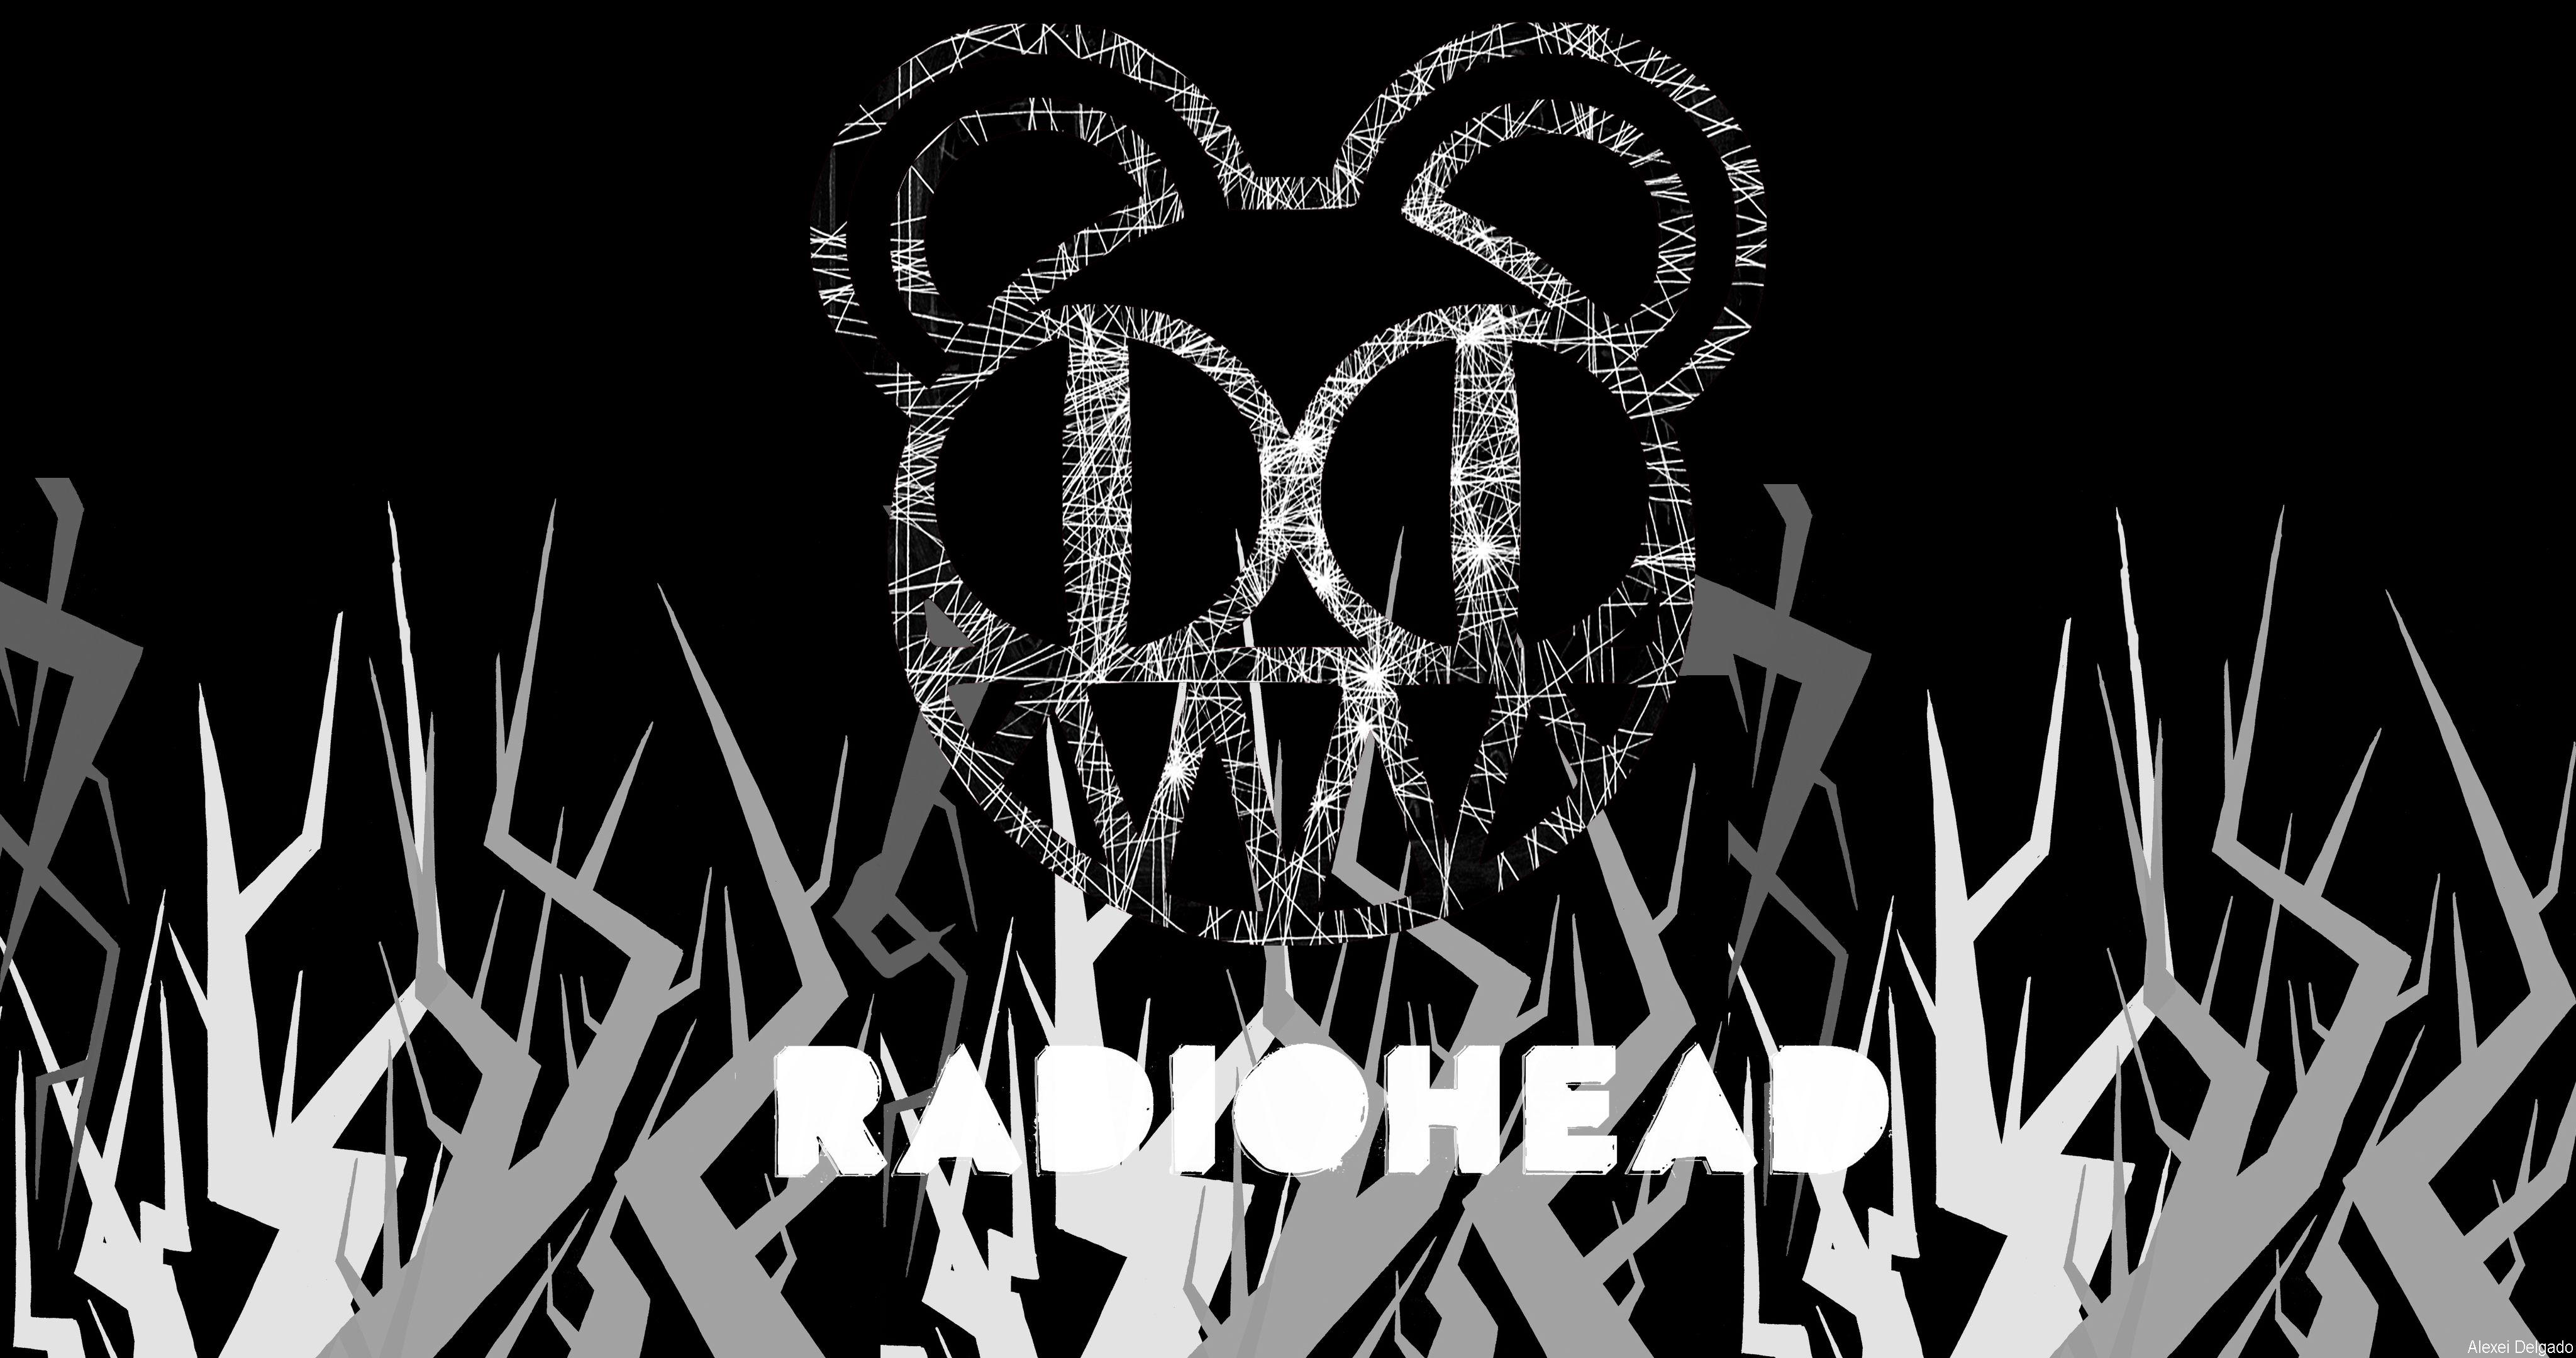 I made a Radiohead wallpaper that I think it went out cool. Enjoy